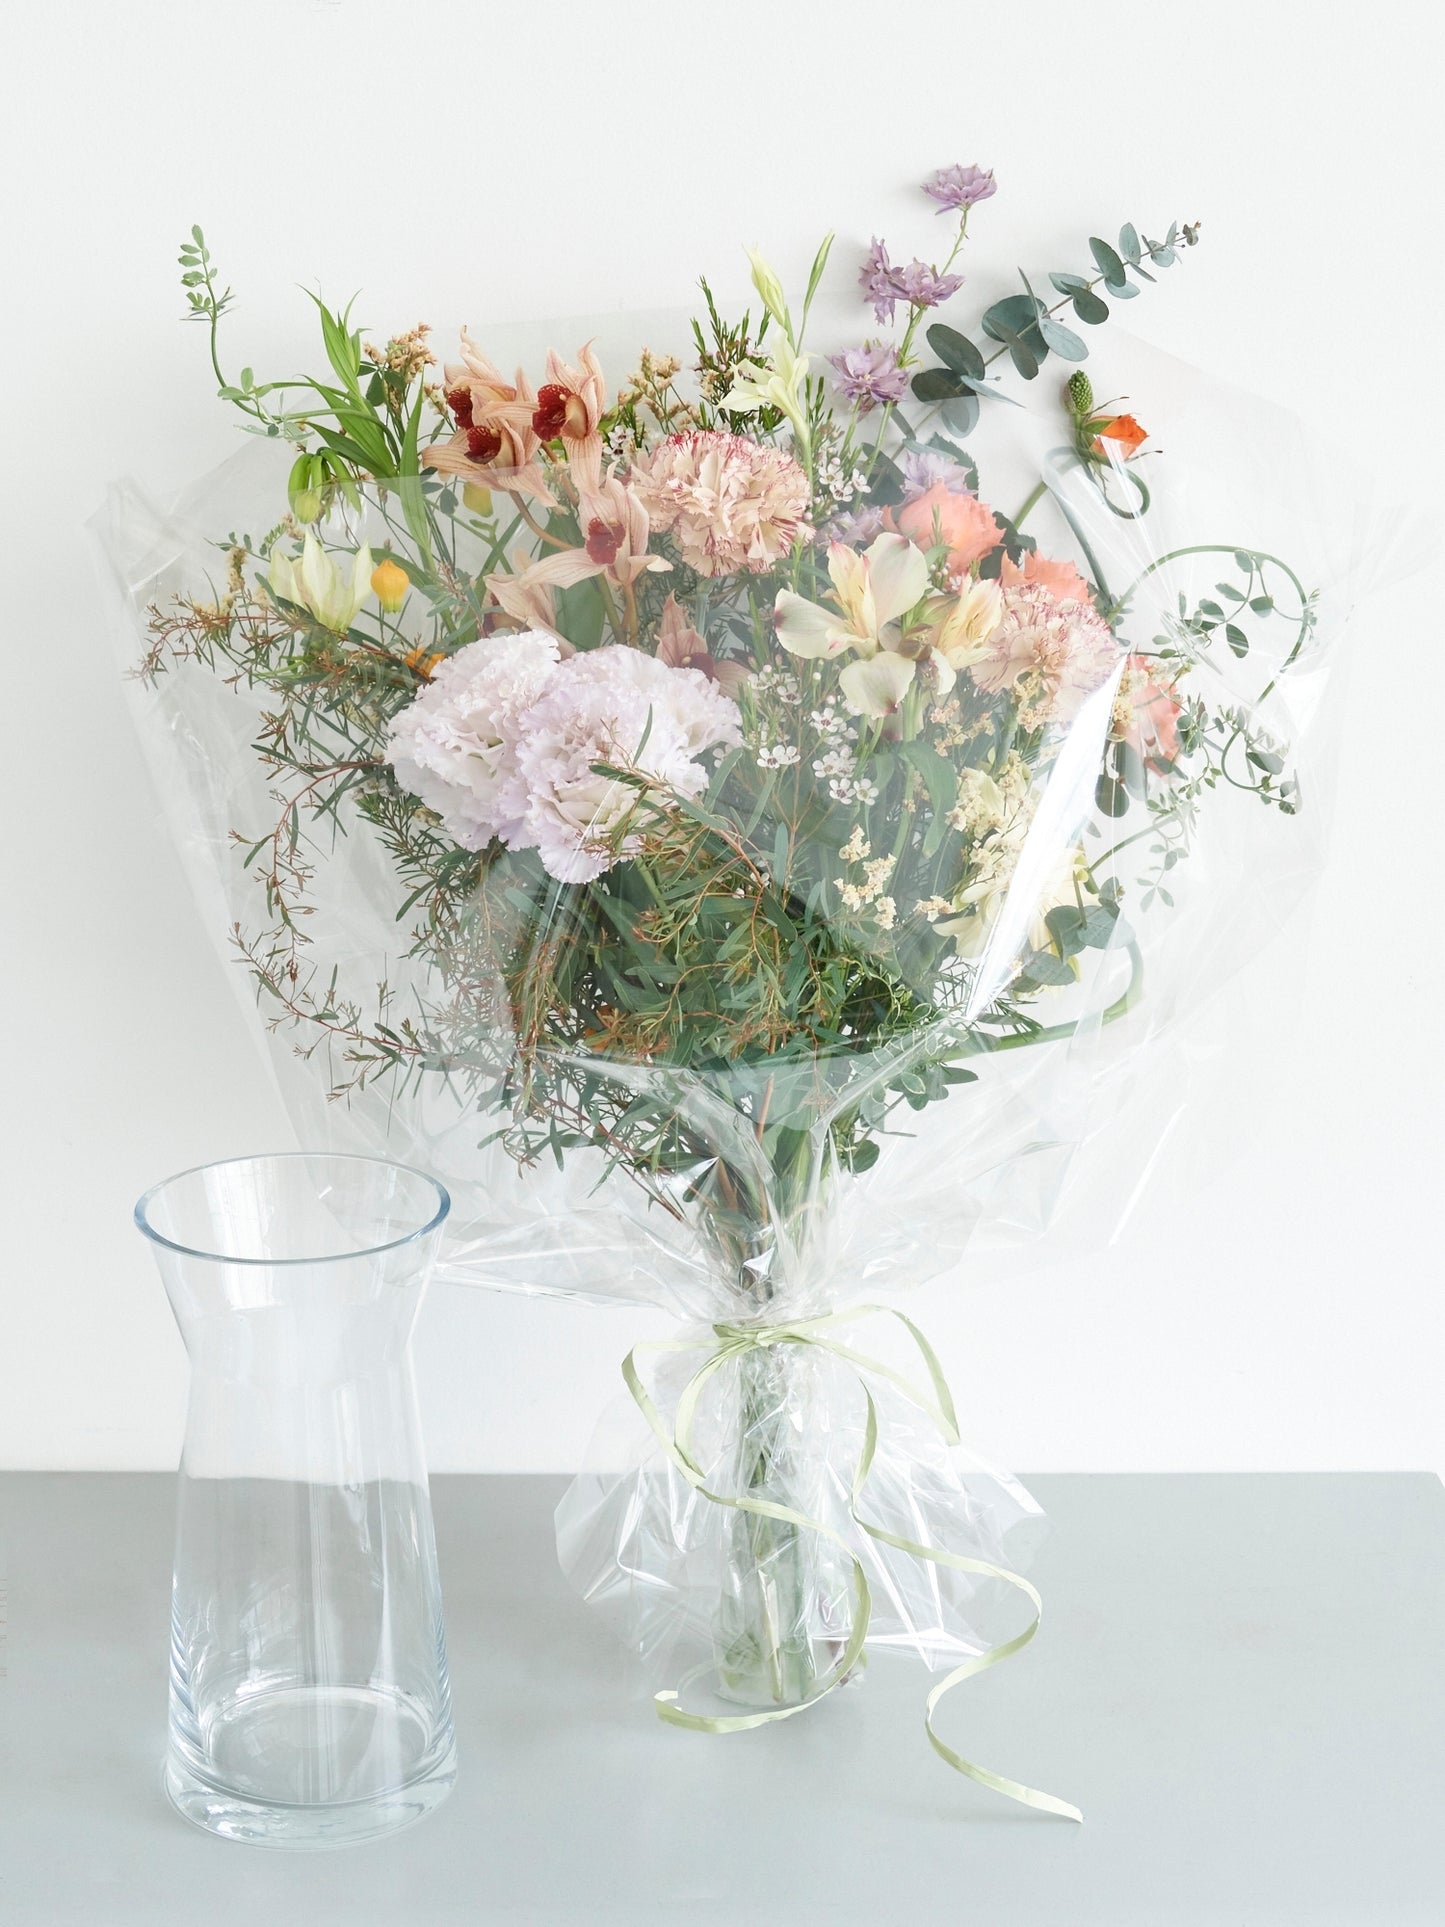 【mother's day】bouquet L and vase set 【Delivery date: 5/10 (Fri)】